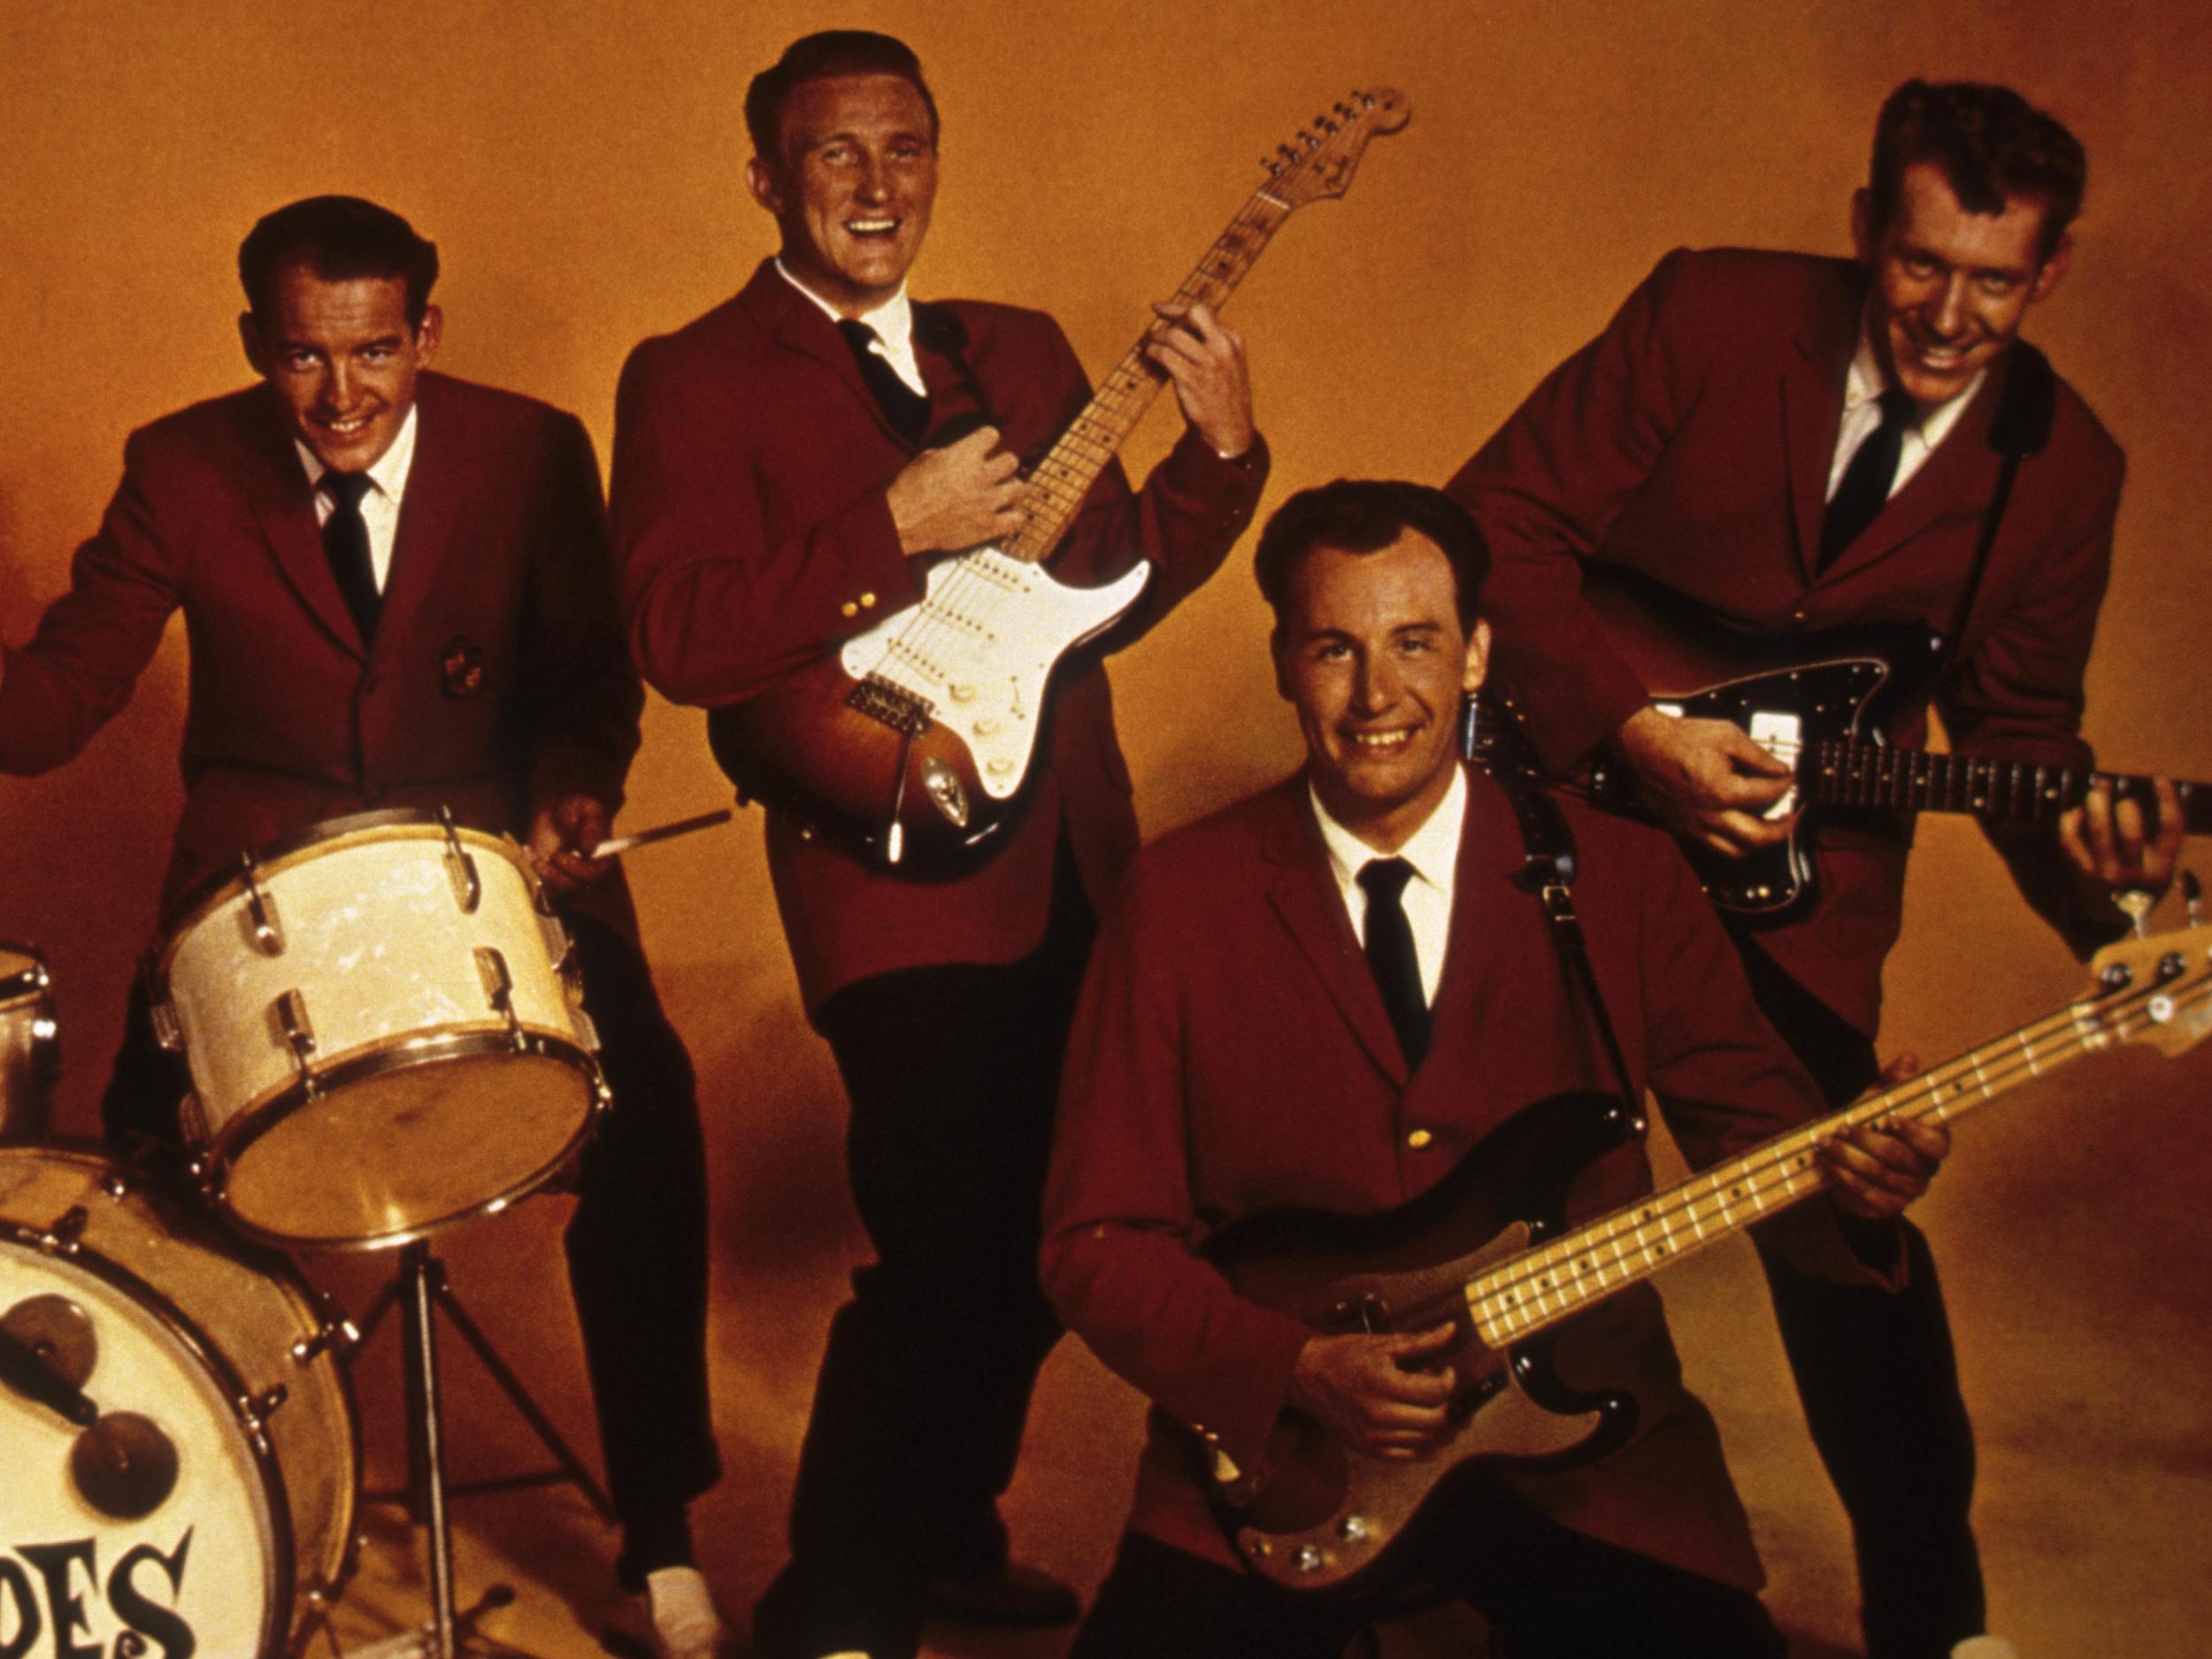 Edwards (third from left) with the band in their heyday. His nimble, melodic guitar work spawned many imitators